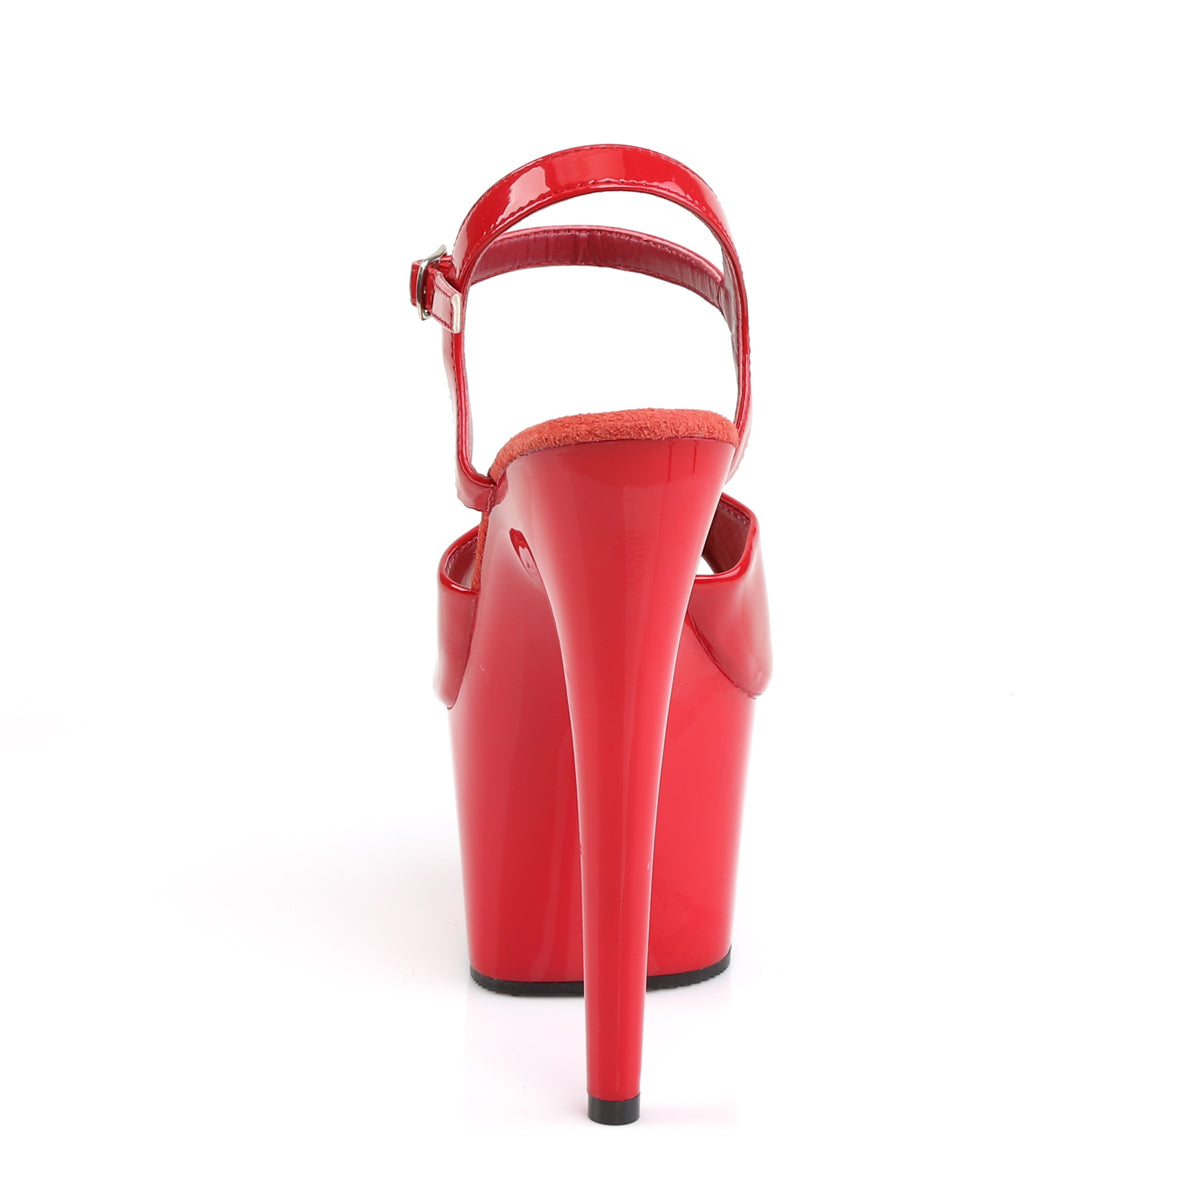 Pleaser Womens Sandals ADORE-709 Red/Red